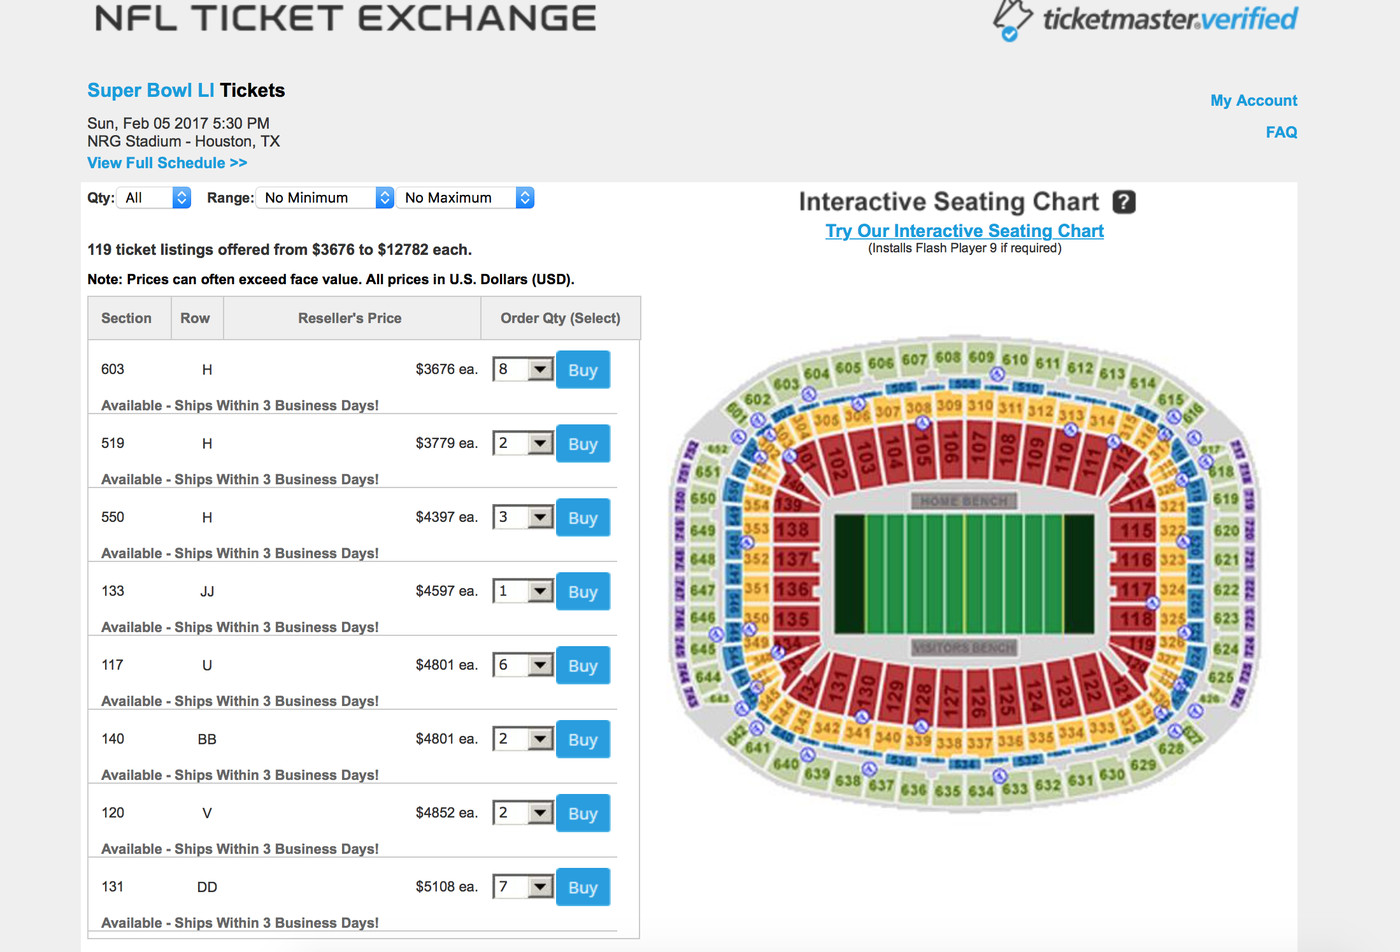 starting price of super bowl tickets